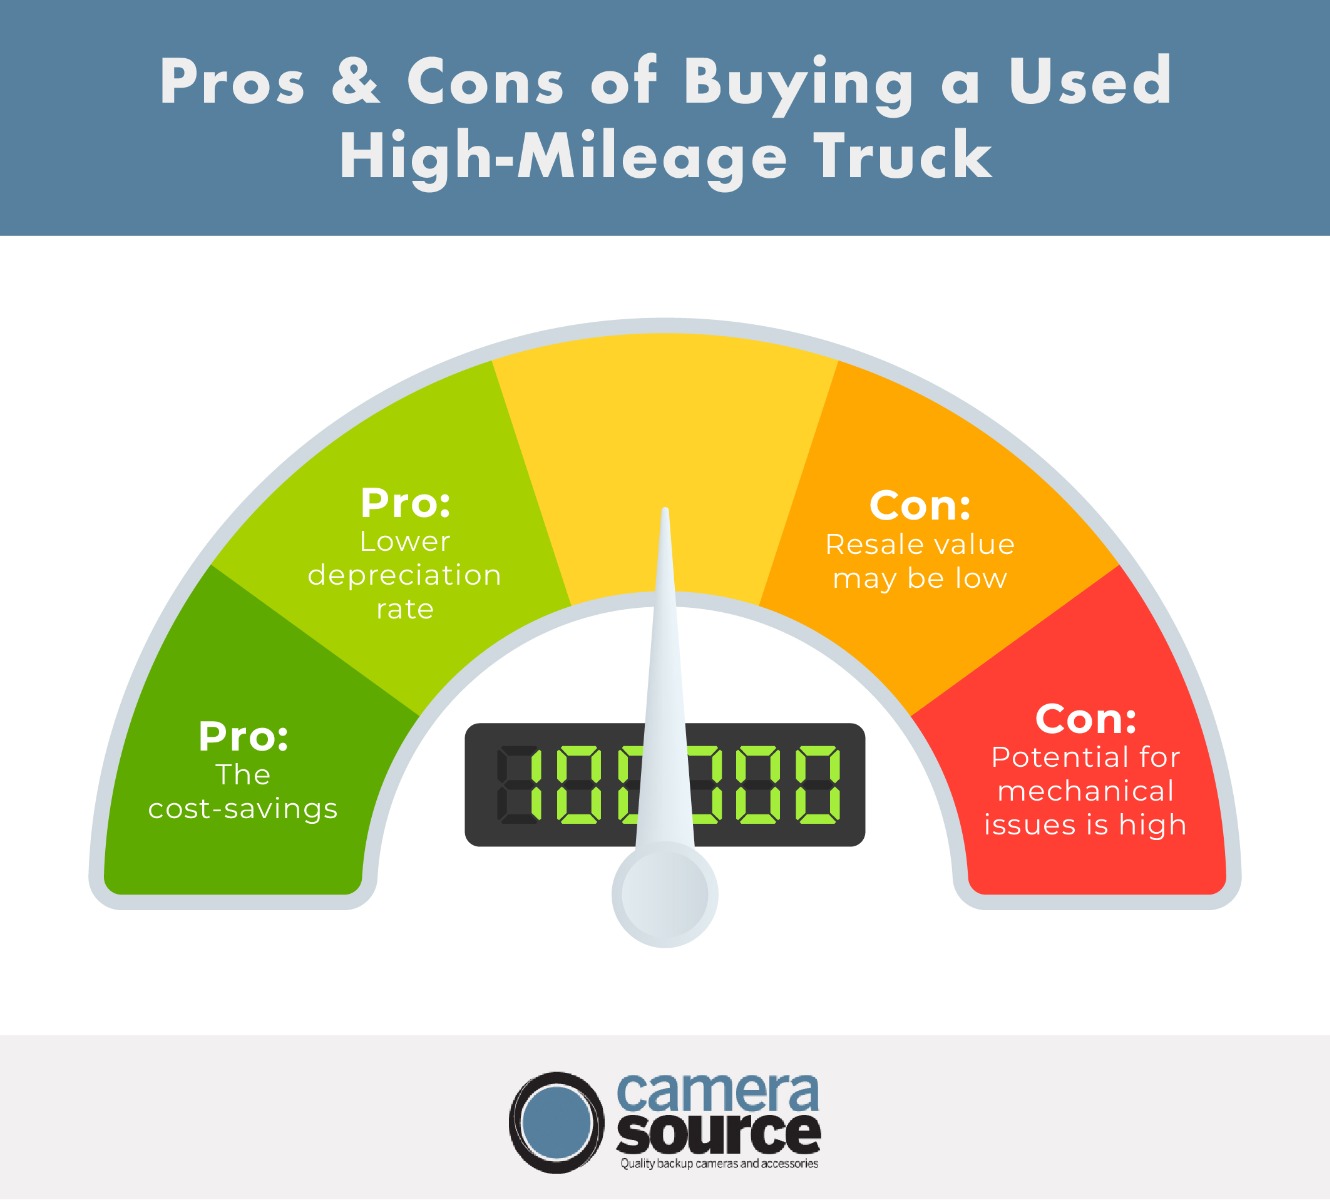 Pros and Cons of a Used High-Mileage Truck